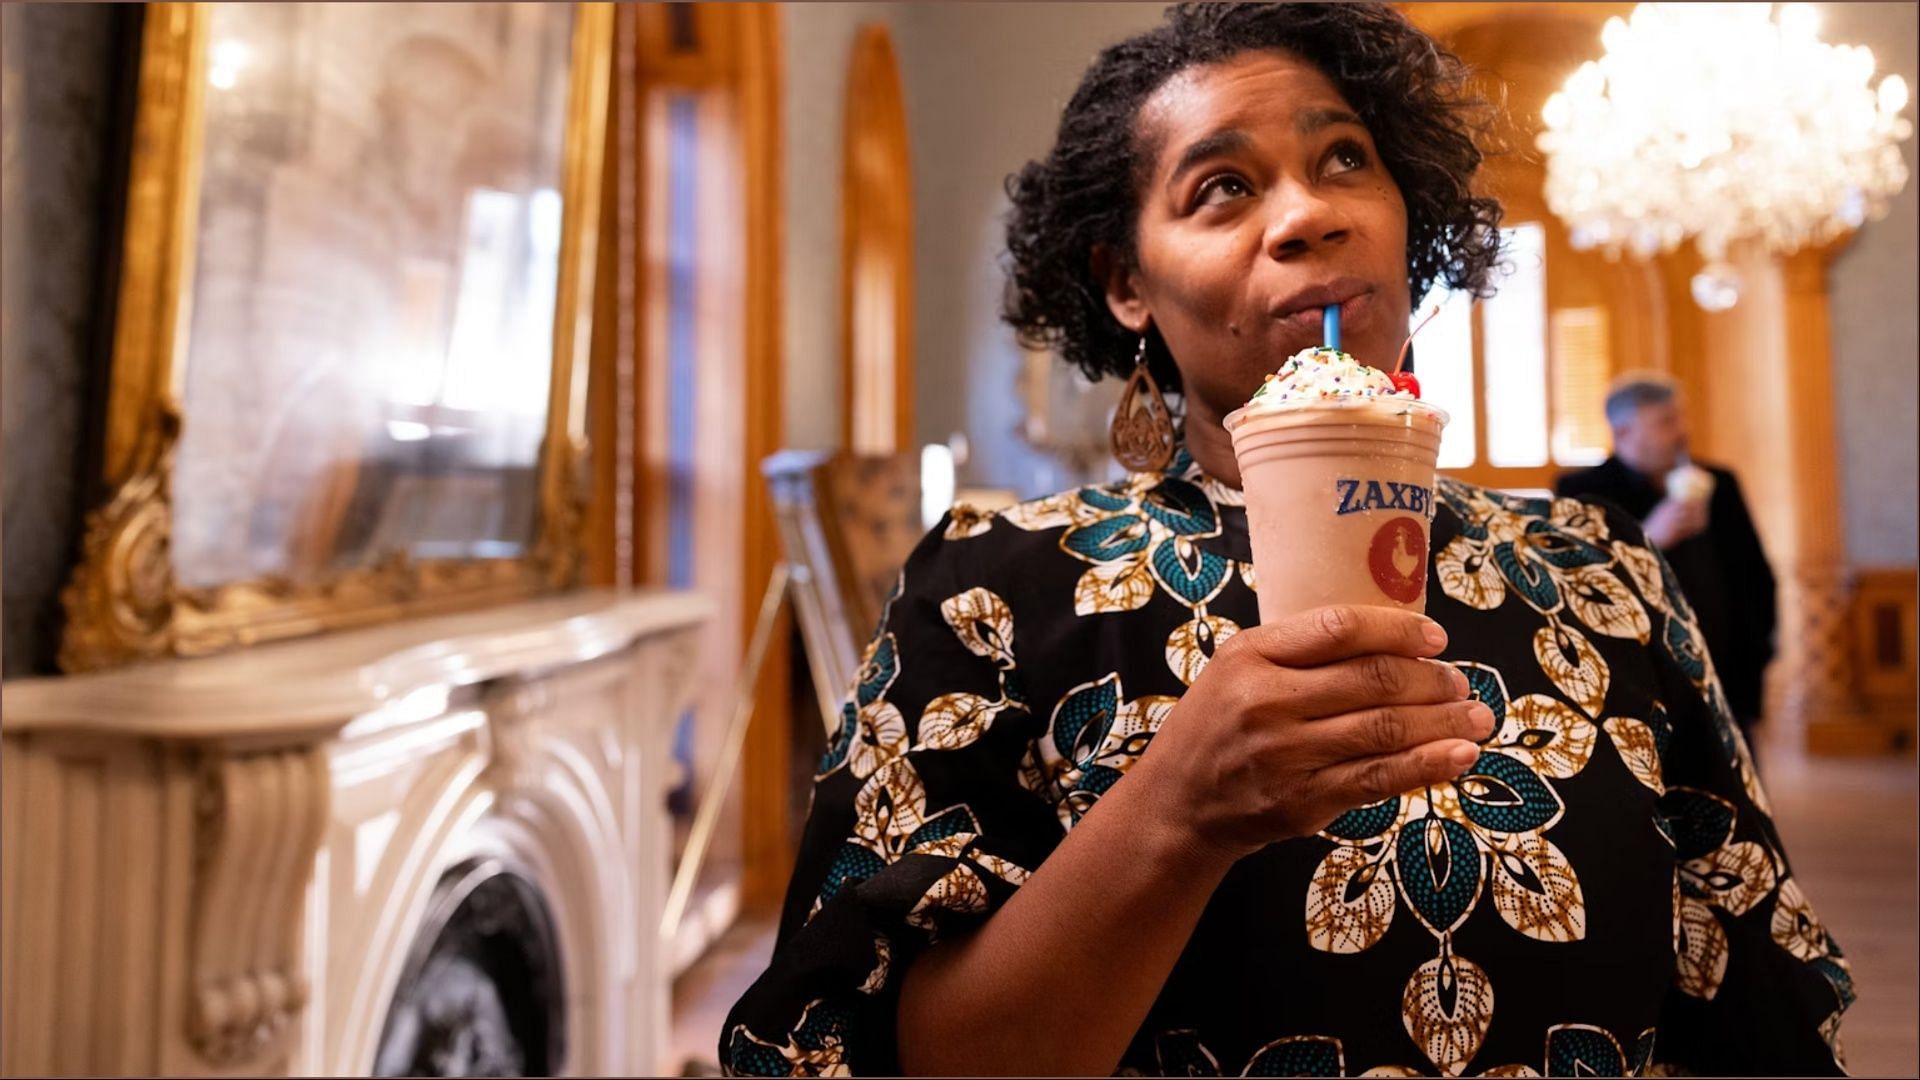 The hand-spun milkshakes are available at stores starting February 27 (Image via Visit Macon)